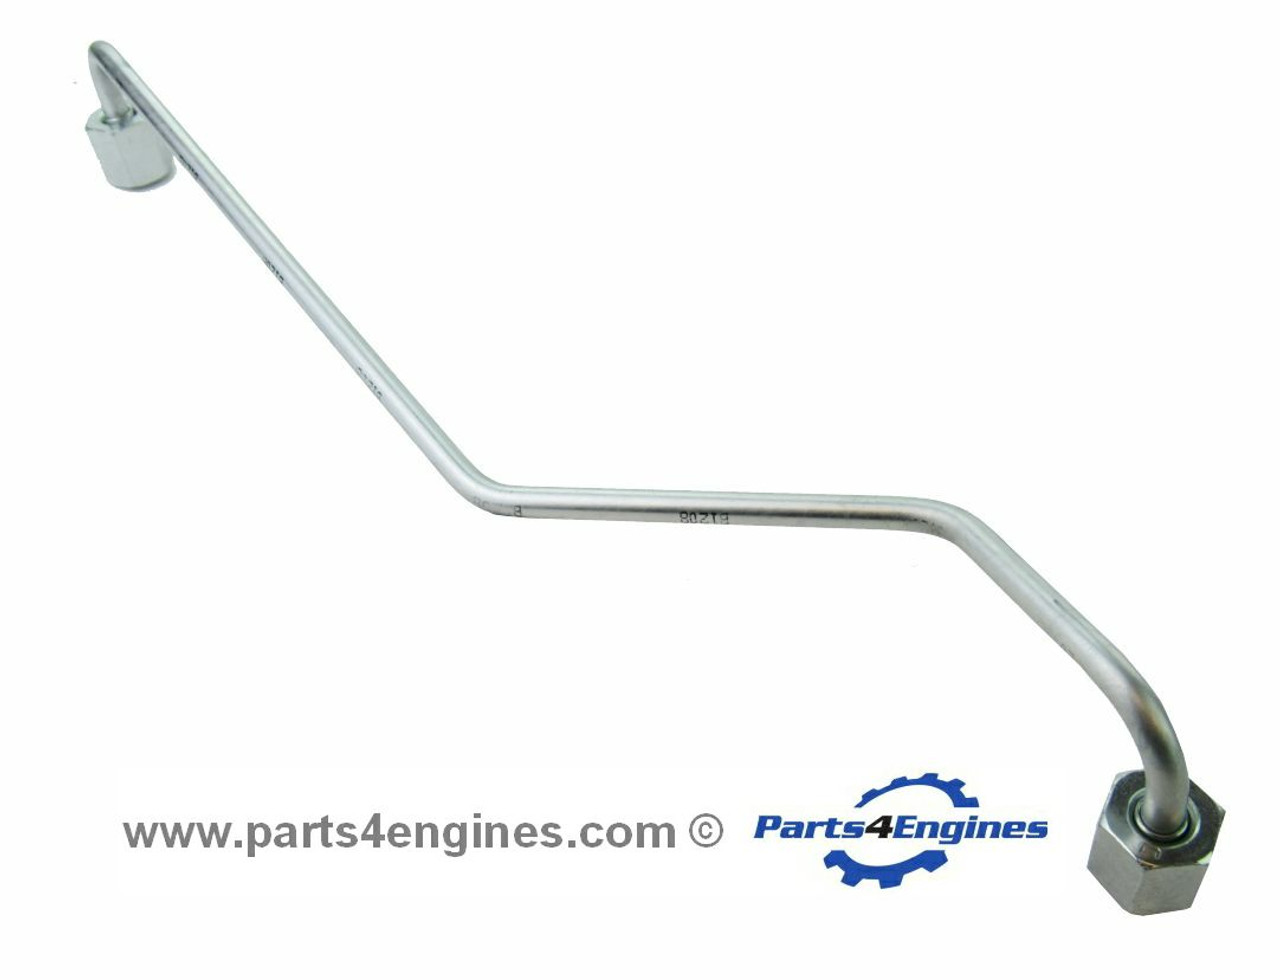 Perkins 422TGM Injector pipes, from parts4engines.com No4